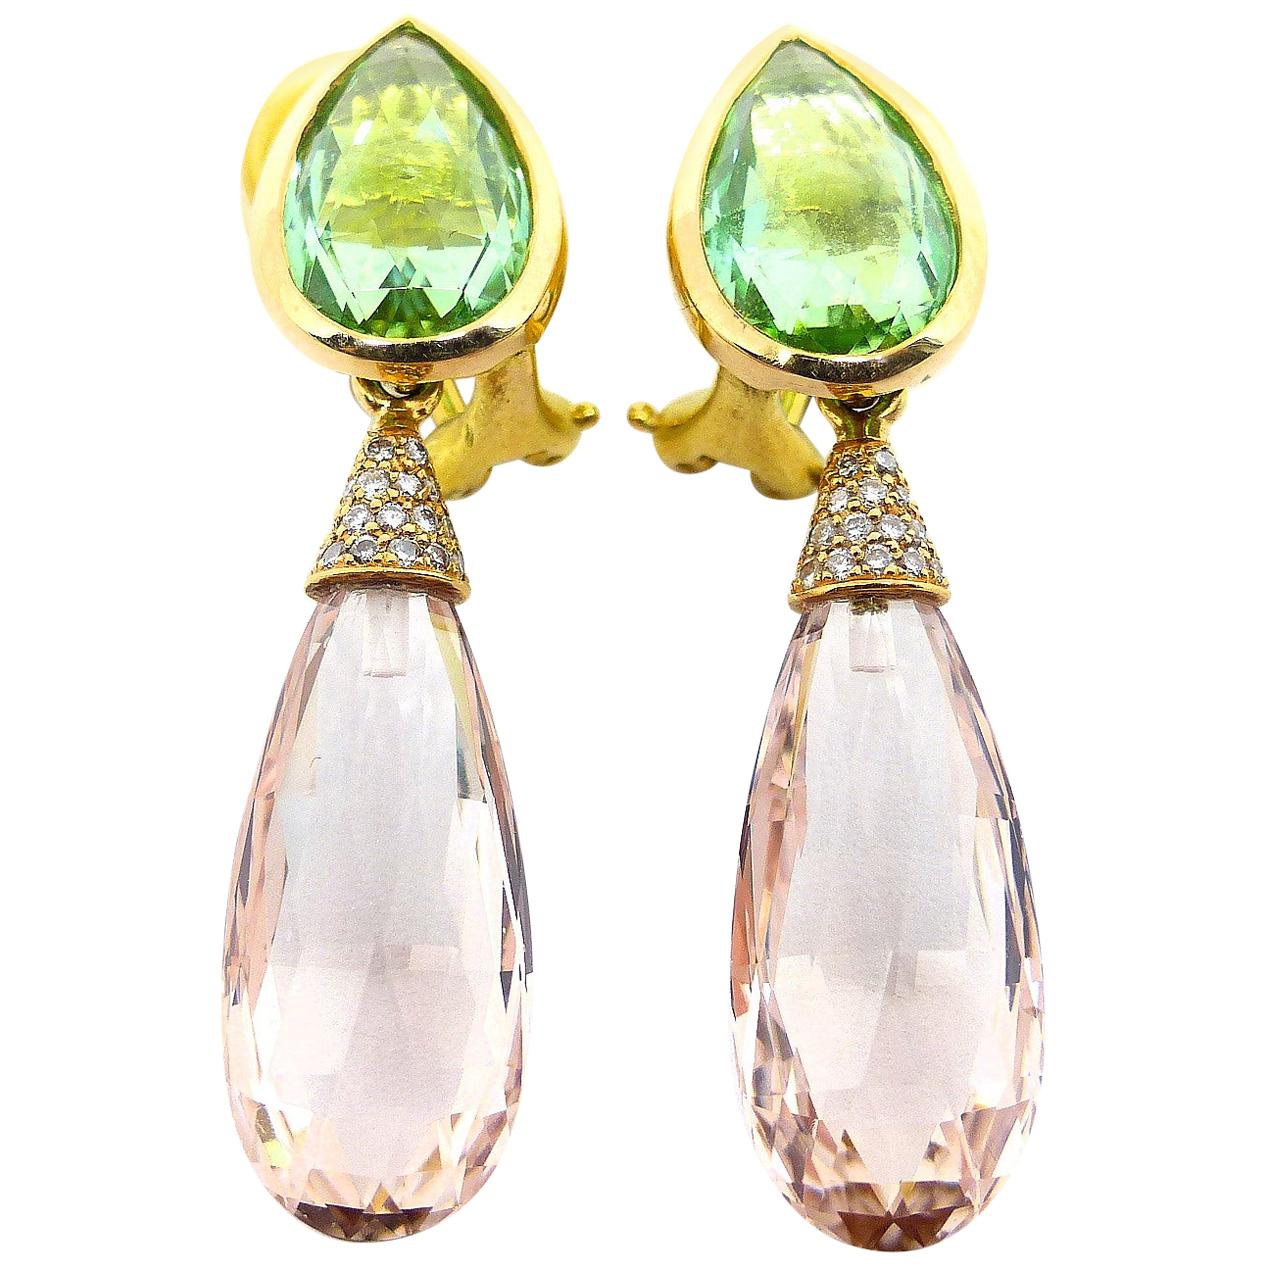 Earring in Rose Gold with 2 Morganites Briolets and 2 Tourmalines and Diamonds.